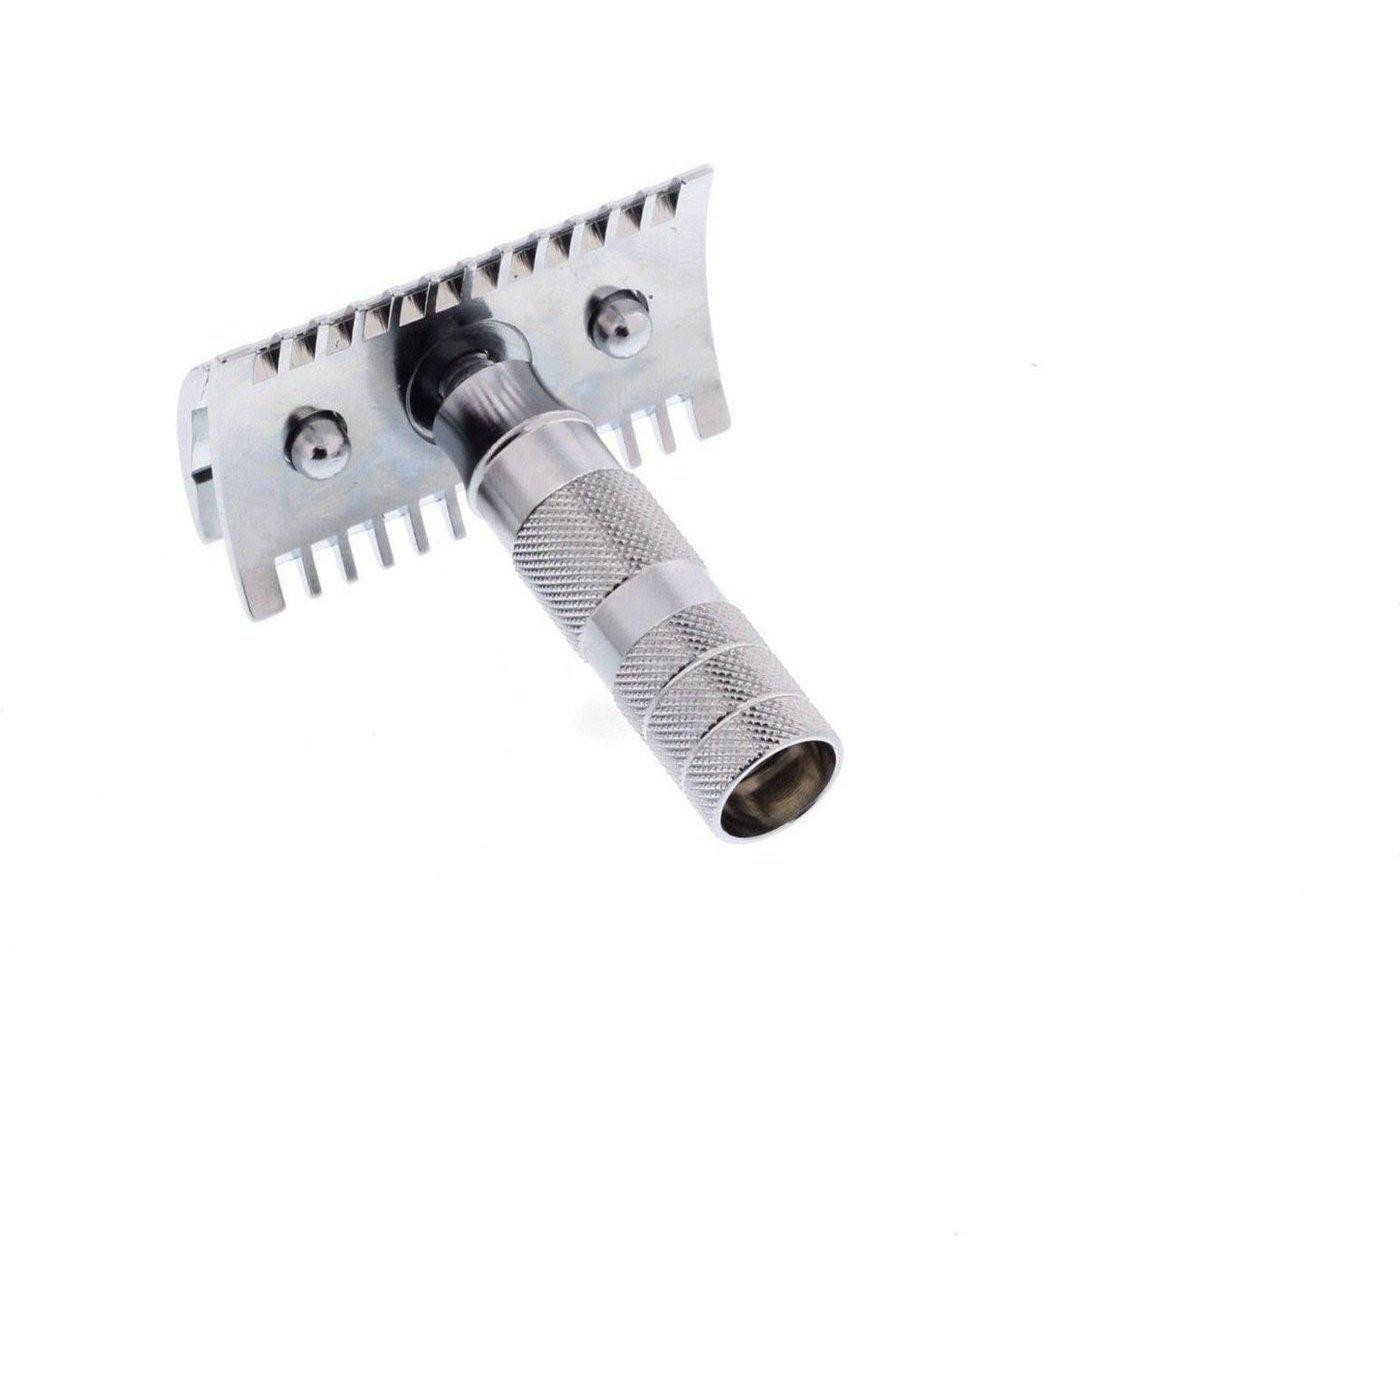 Product image 3 for Merkur Travel Safety Razor, Open Tooth